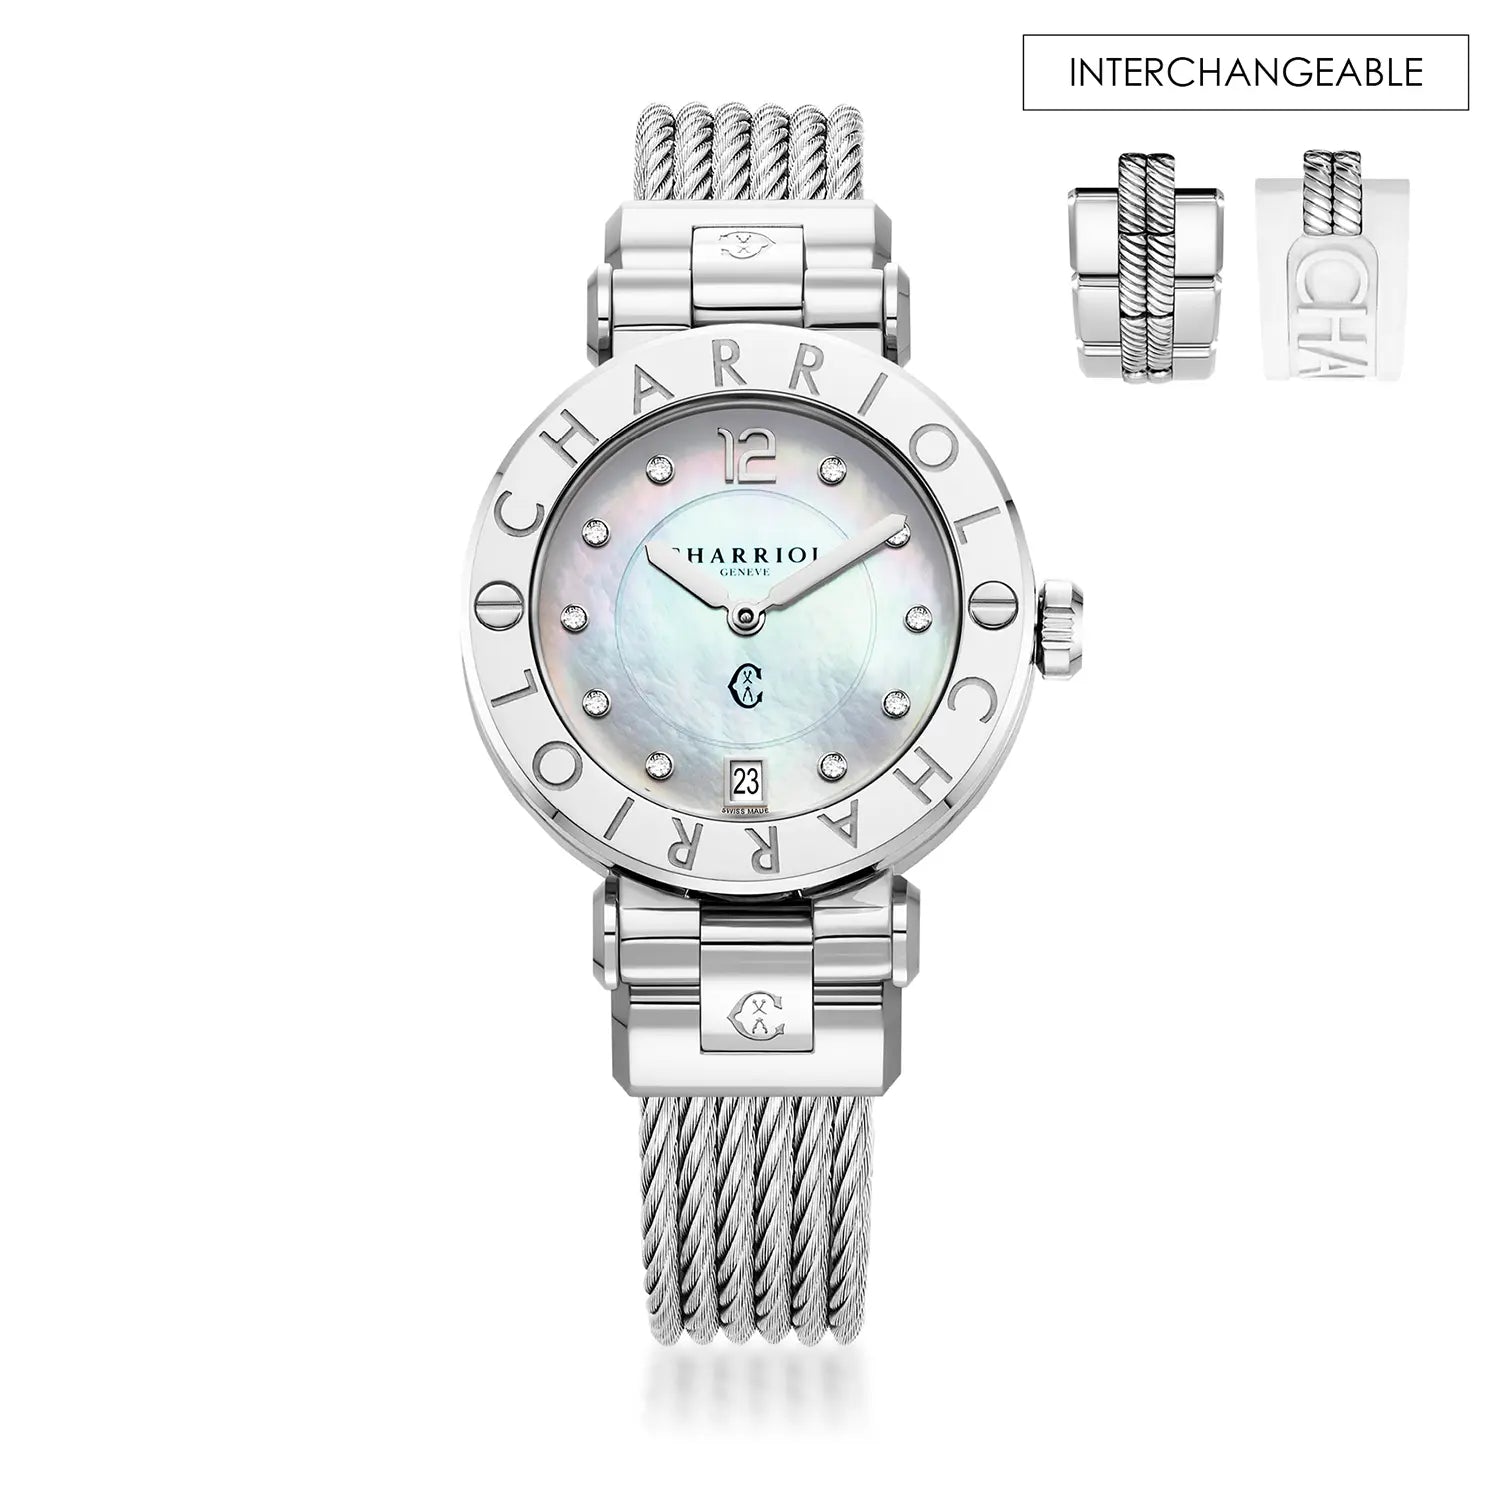 NAVIGATOR CRUISE, 36MM, QUARTZ CALIBRE, MOTHER-OF-PEARL WITH 10 DIAMONDS DIAL, "CHARRIOL CHARRIOL" BEZEL, STEEL CABLE INTERCHEANGEABLE STRAP - Charriol Geneve -  Watch